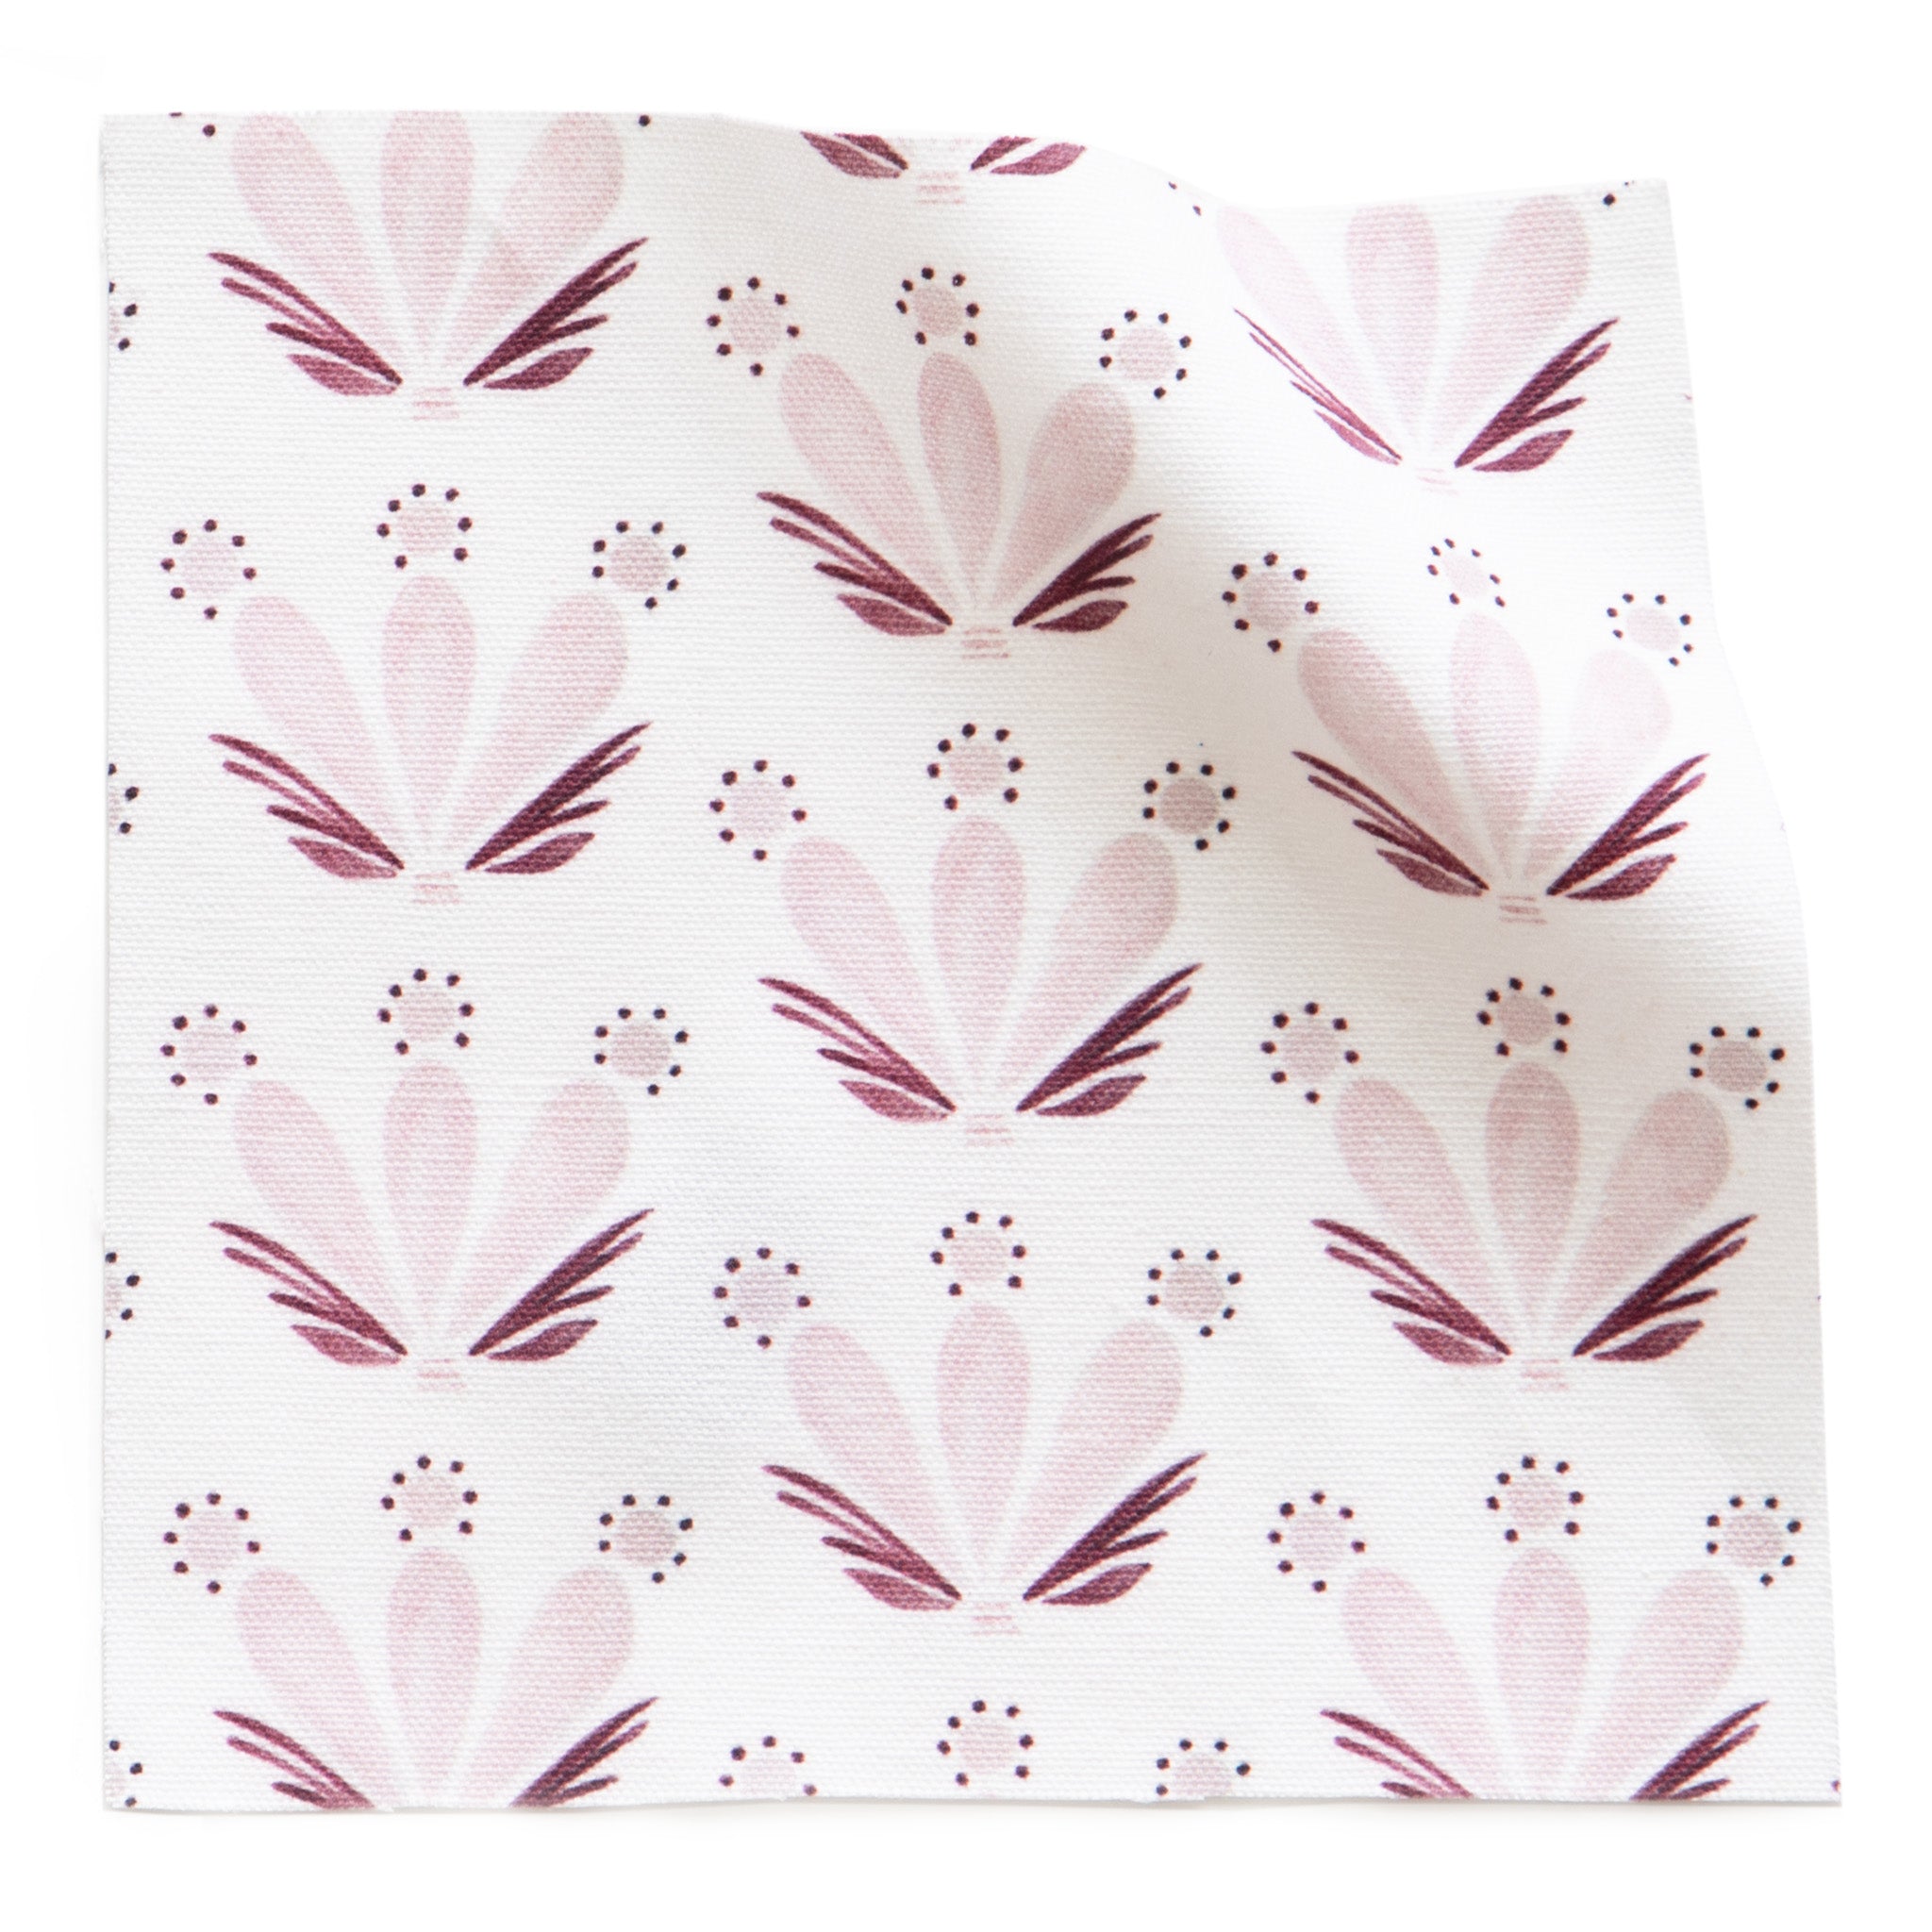 Polycotton Print - Ditsy Floral Various Colours - Sold by Half Metre –  Kayes Textiles